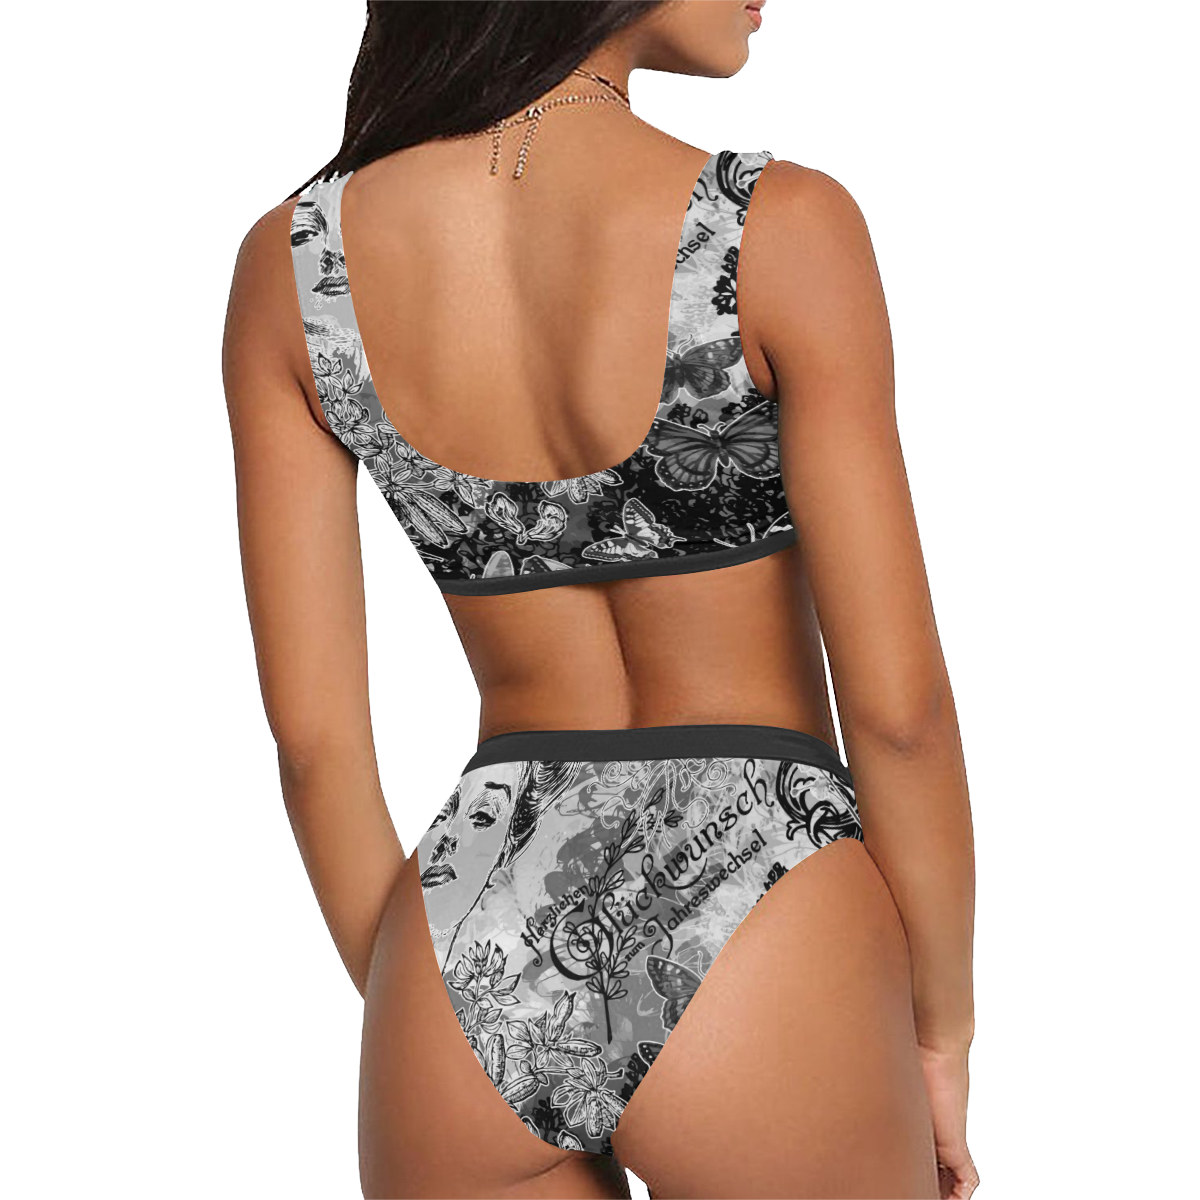 Lady and butterflies Sport Top & High-Waisted Bikini Swimsuit (Model S07)